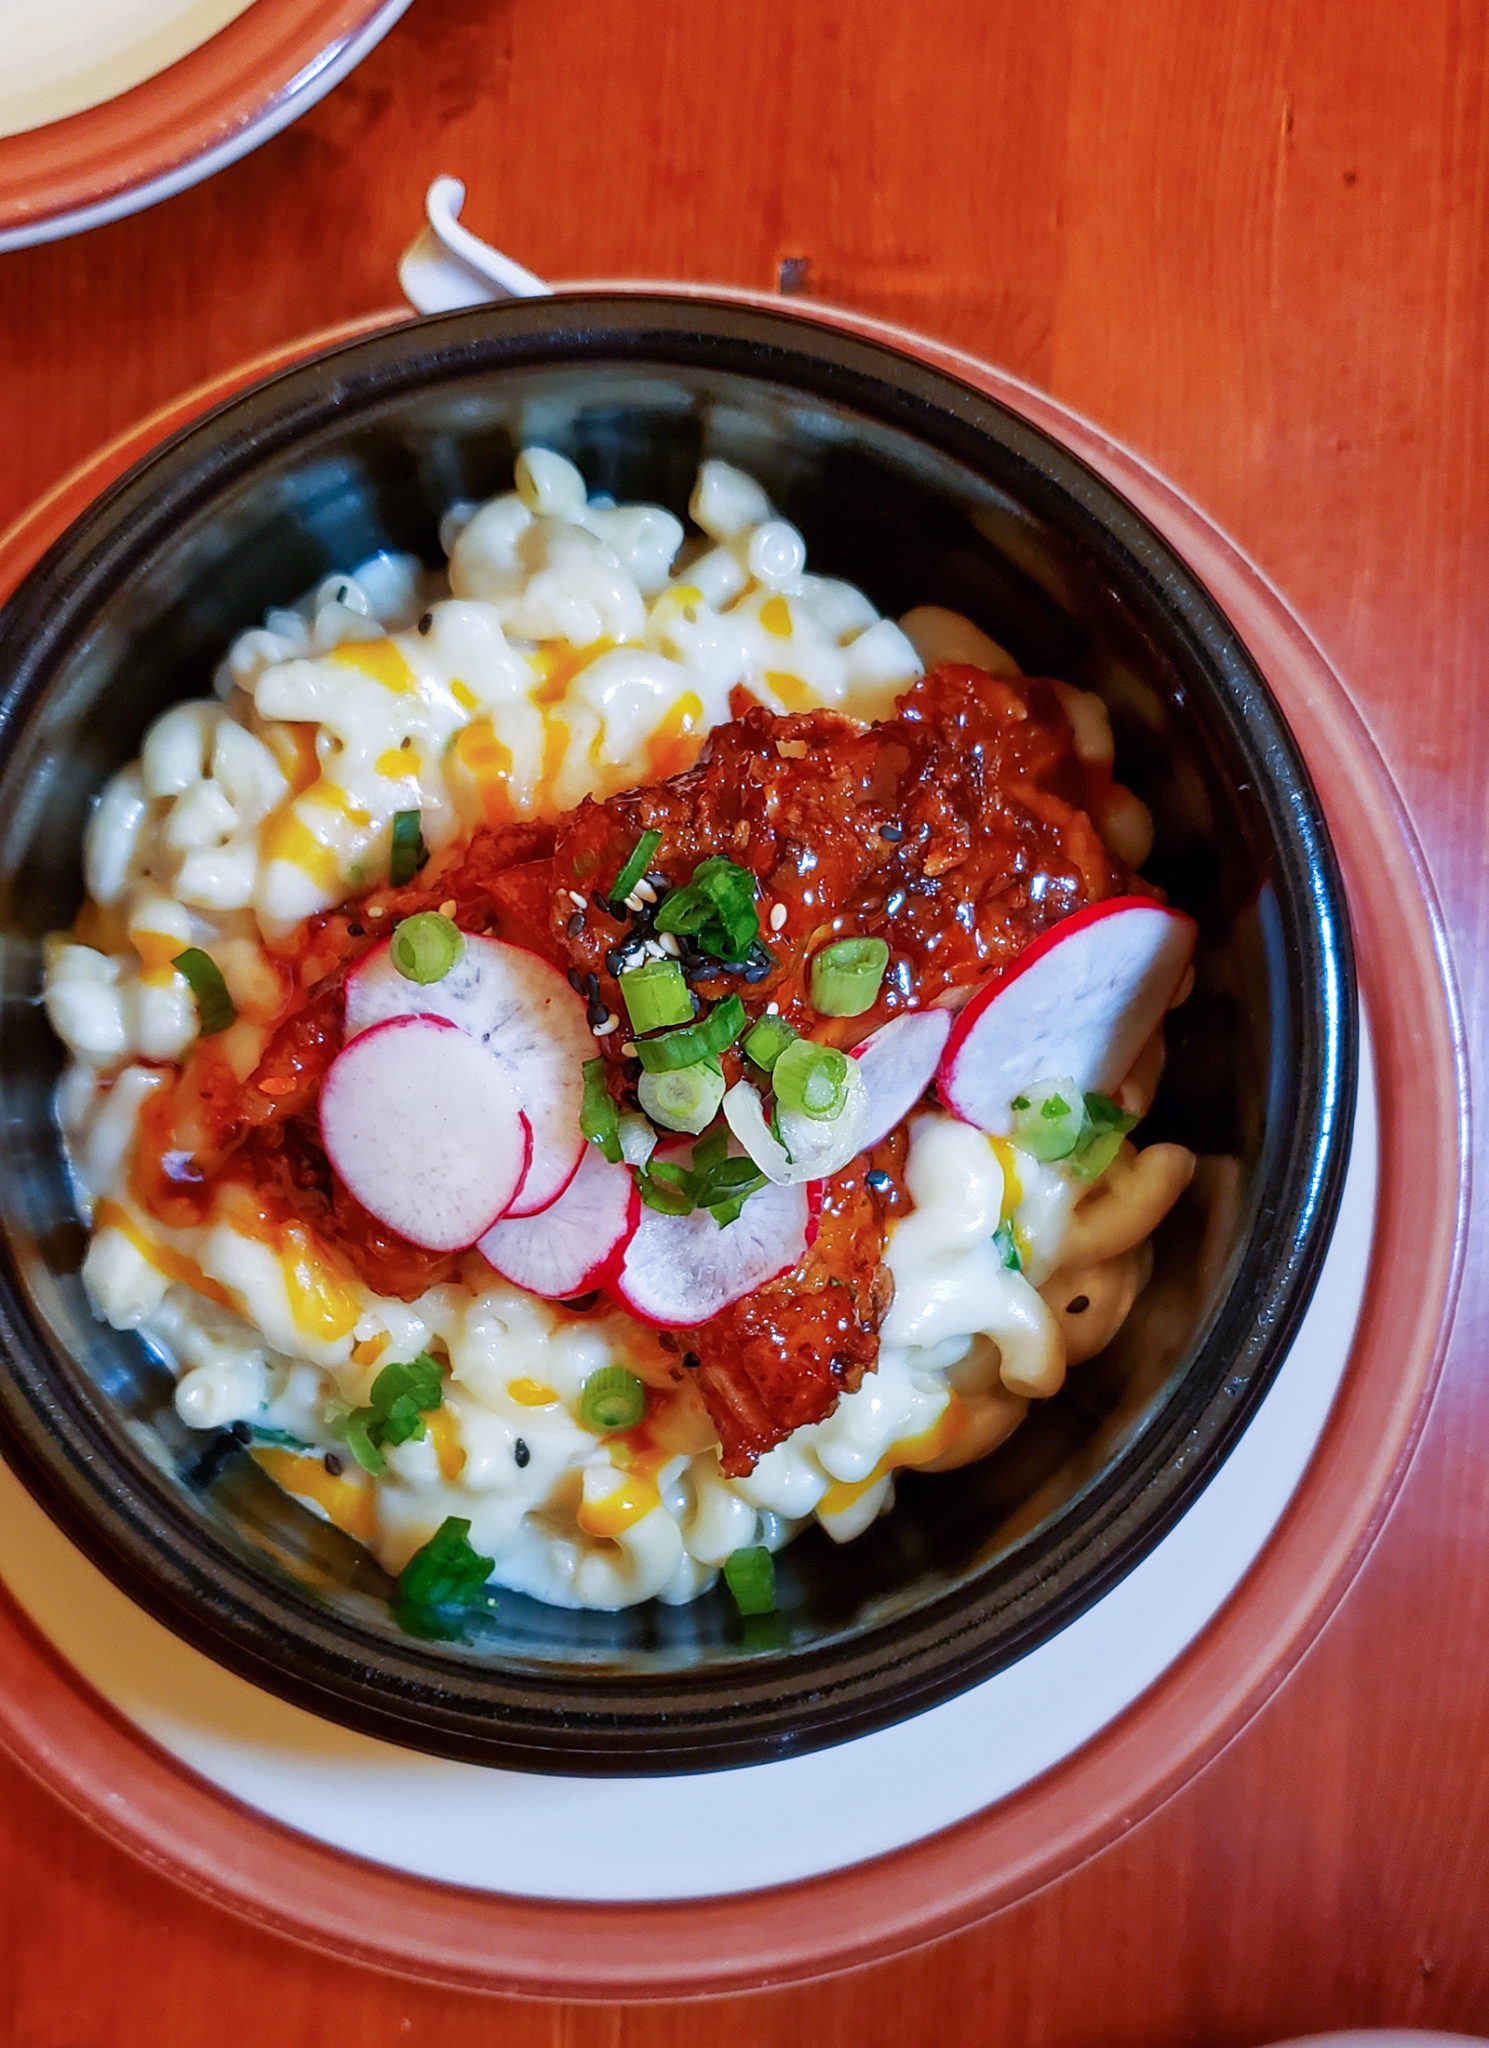 Mac and Crack: KFC (Korean Fried chicken) and macaroni at Pat’s International in Guerneville. Heather Irwin/PD